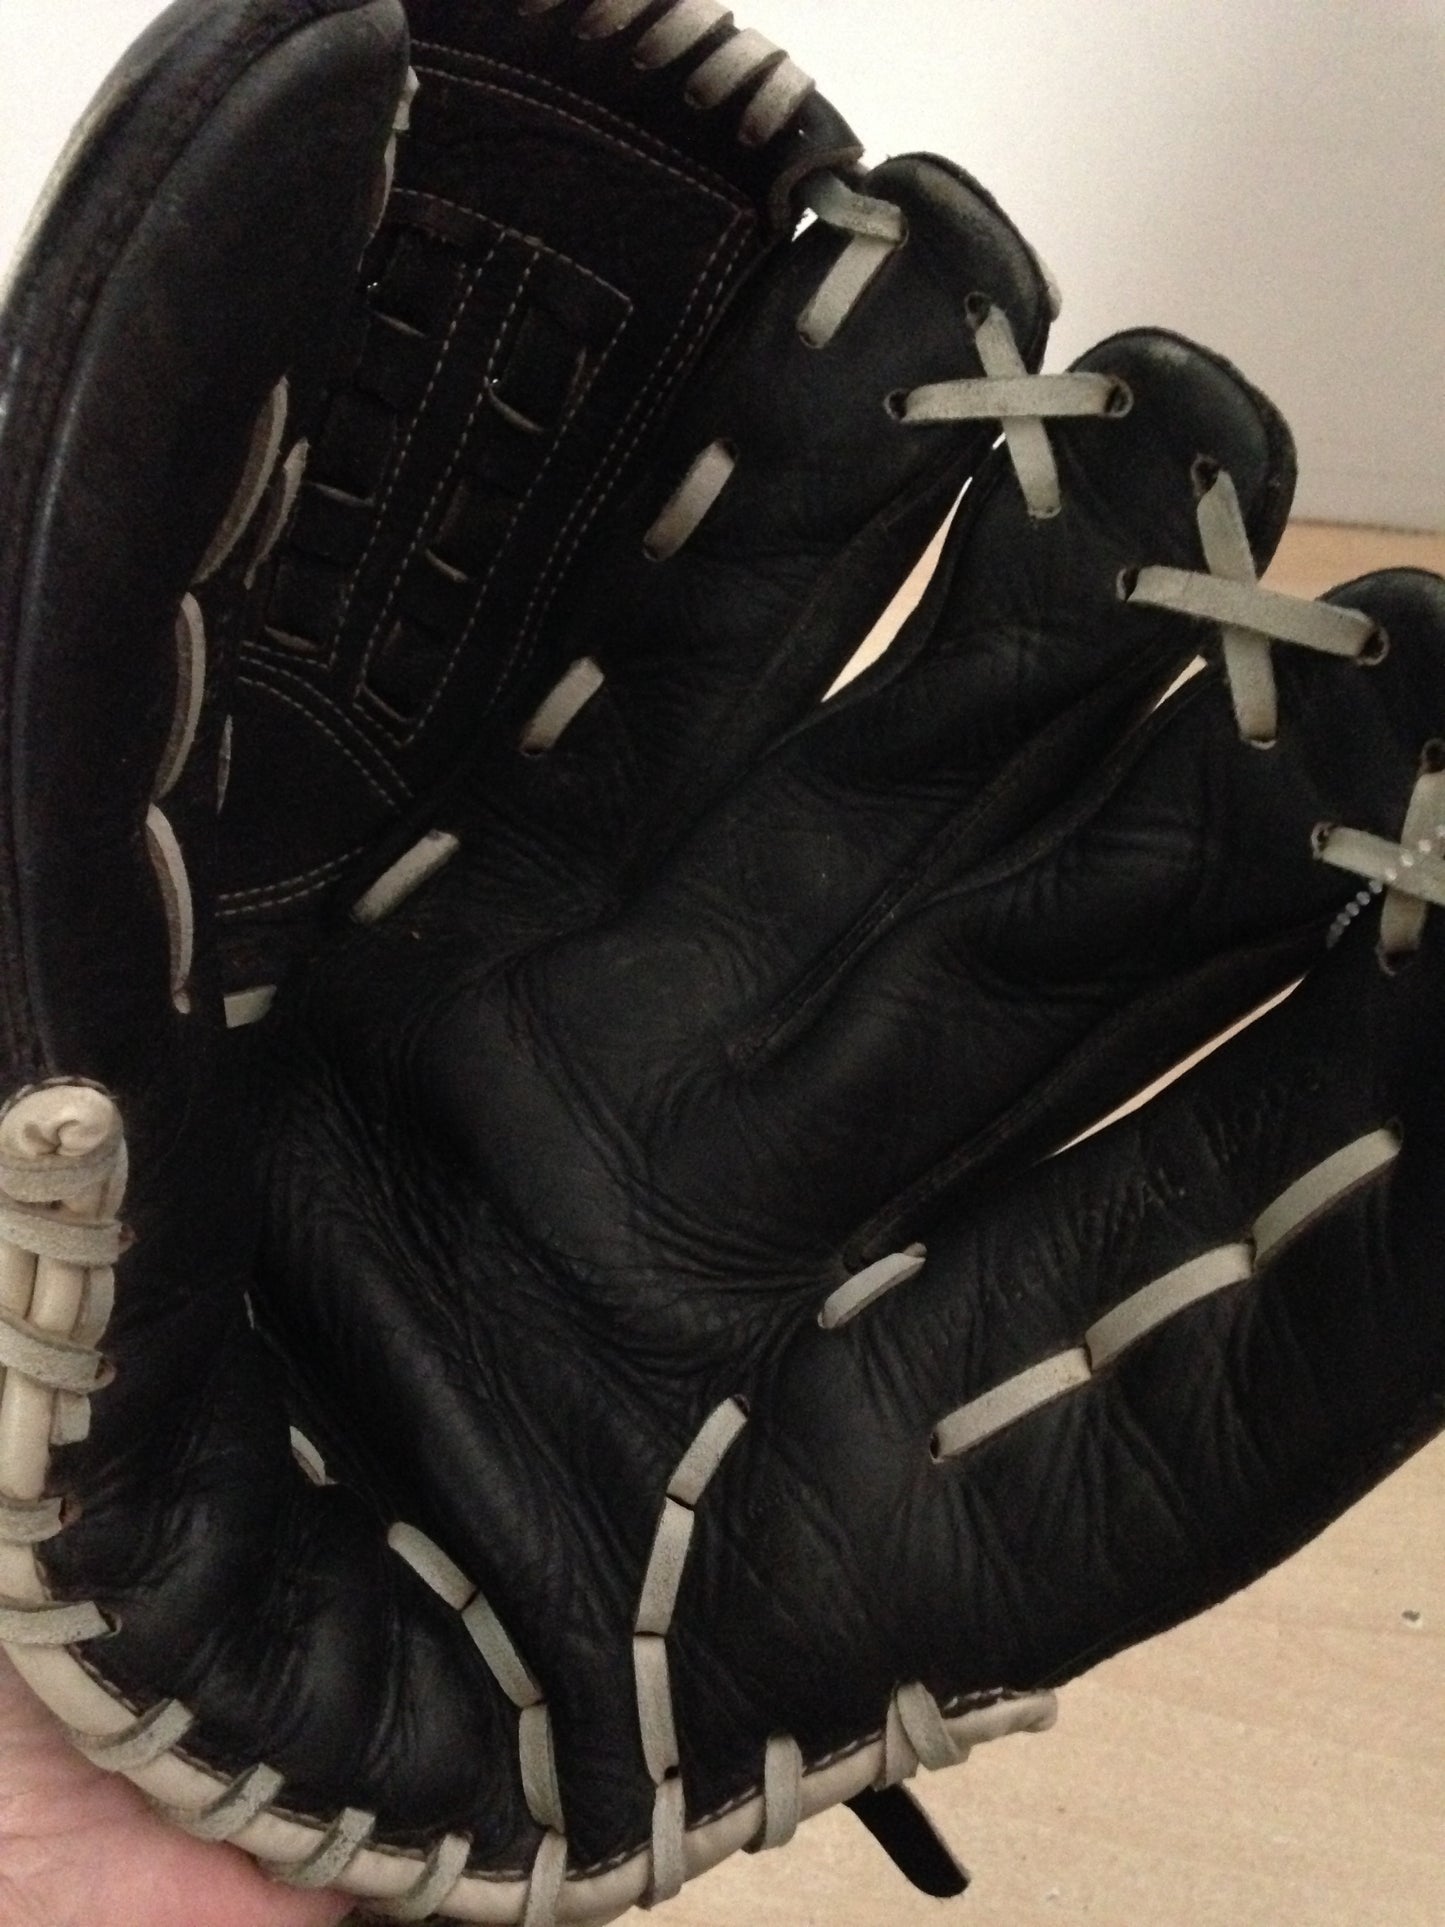 Baseball Glove Adult Size 13 inch Nike Professional  Black Soft Leather Excellent Fits on Left Hand